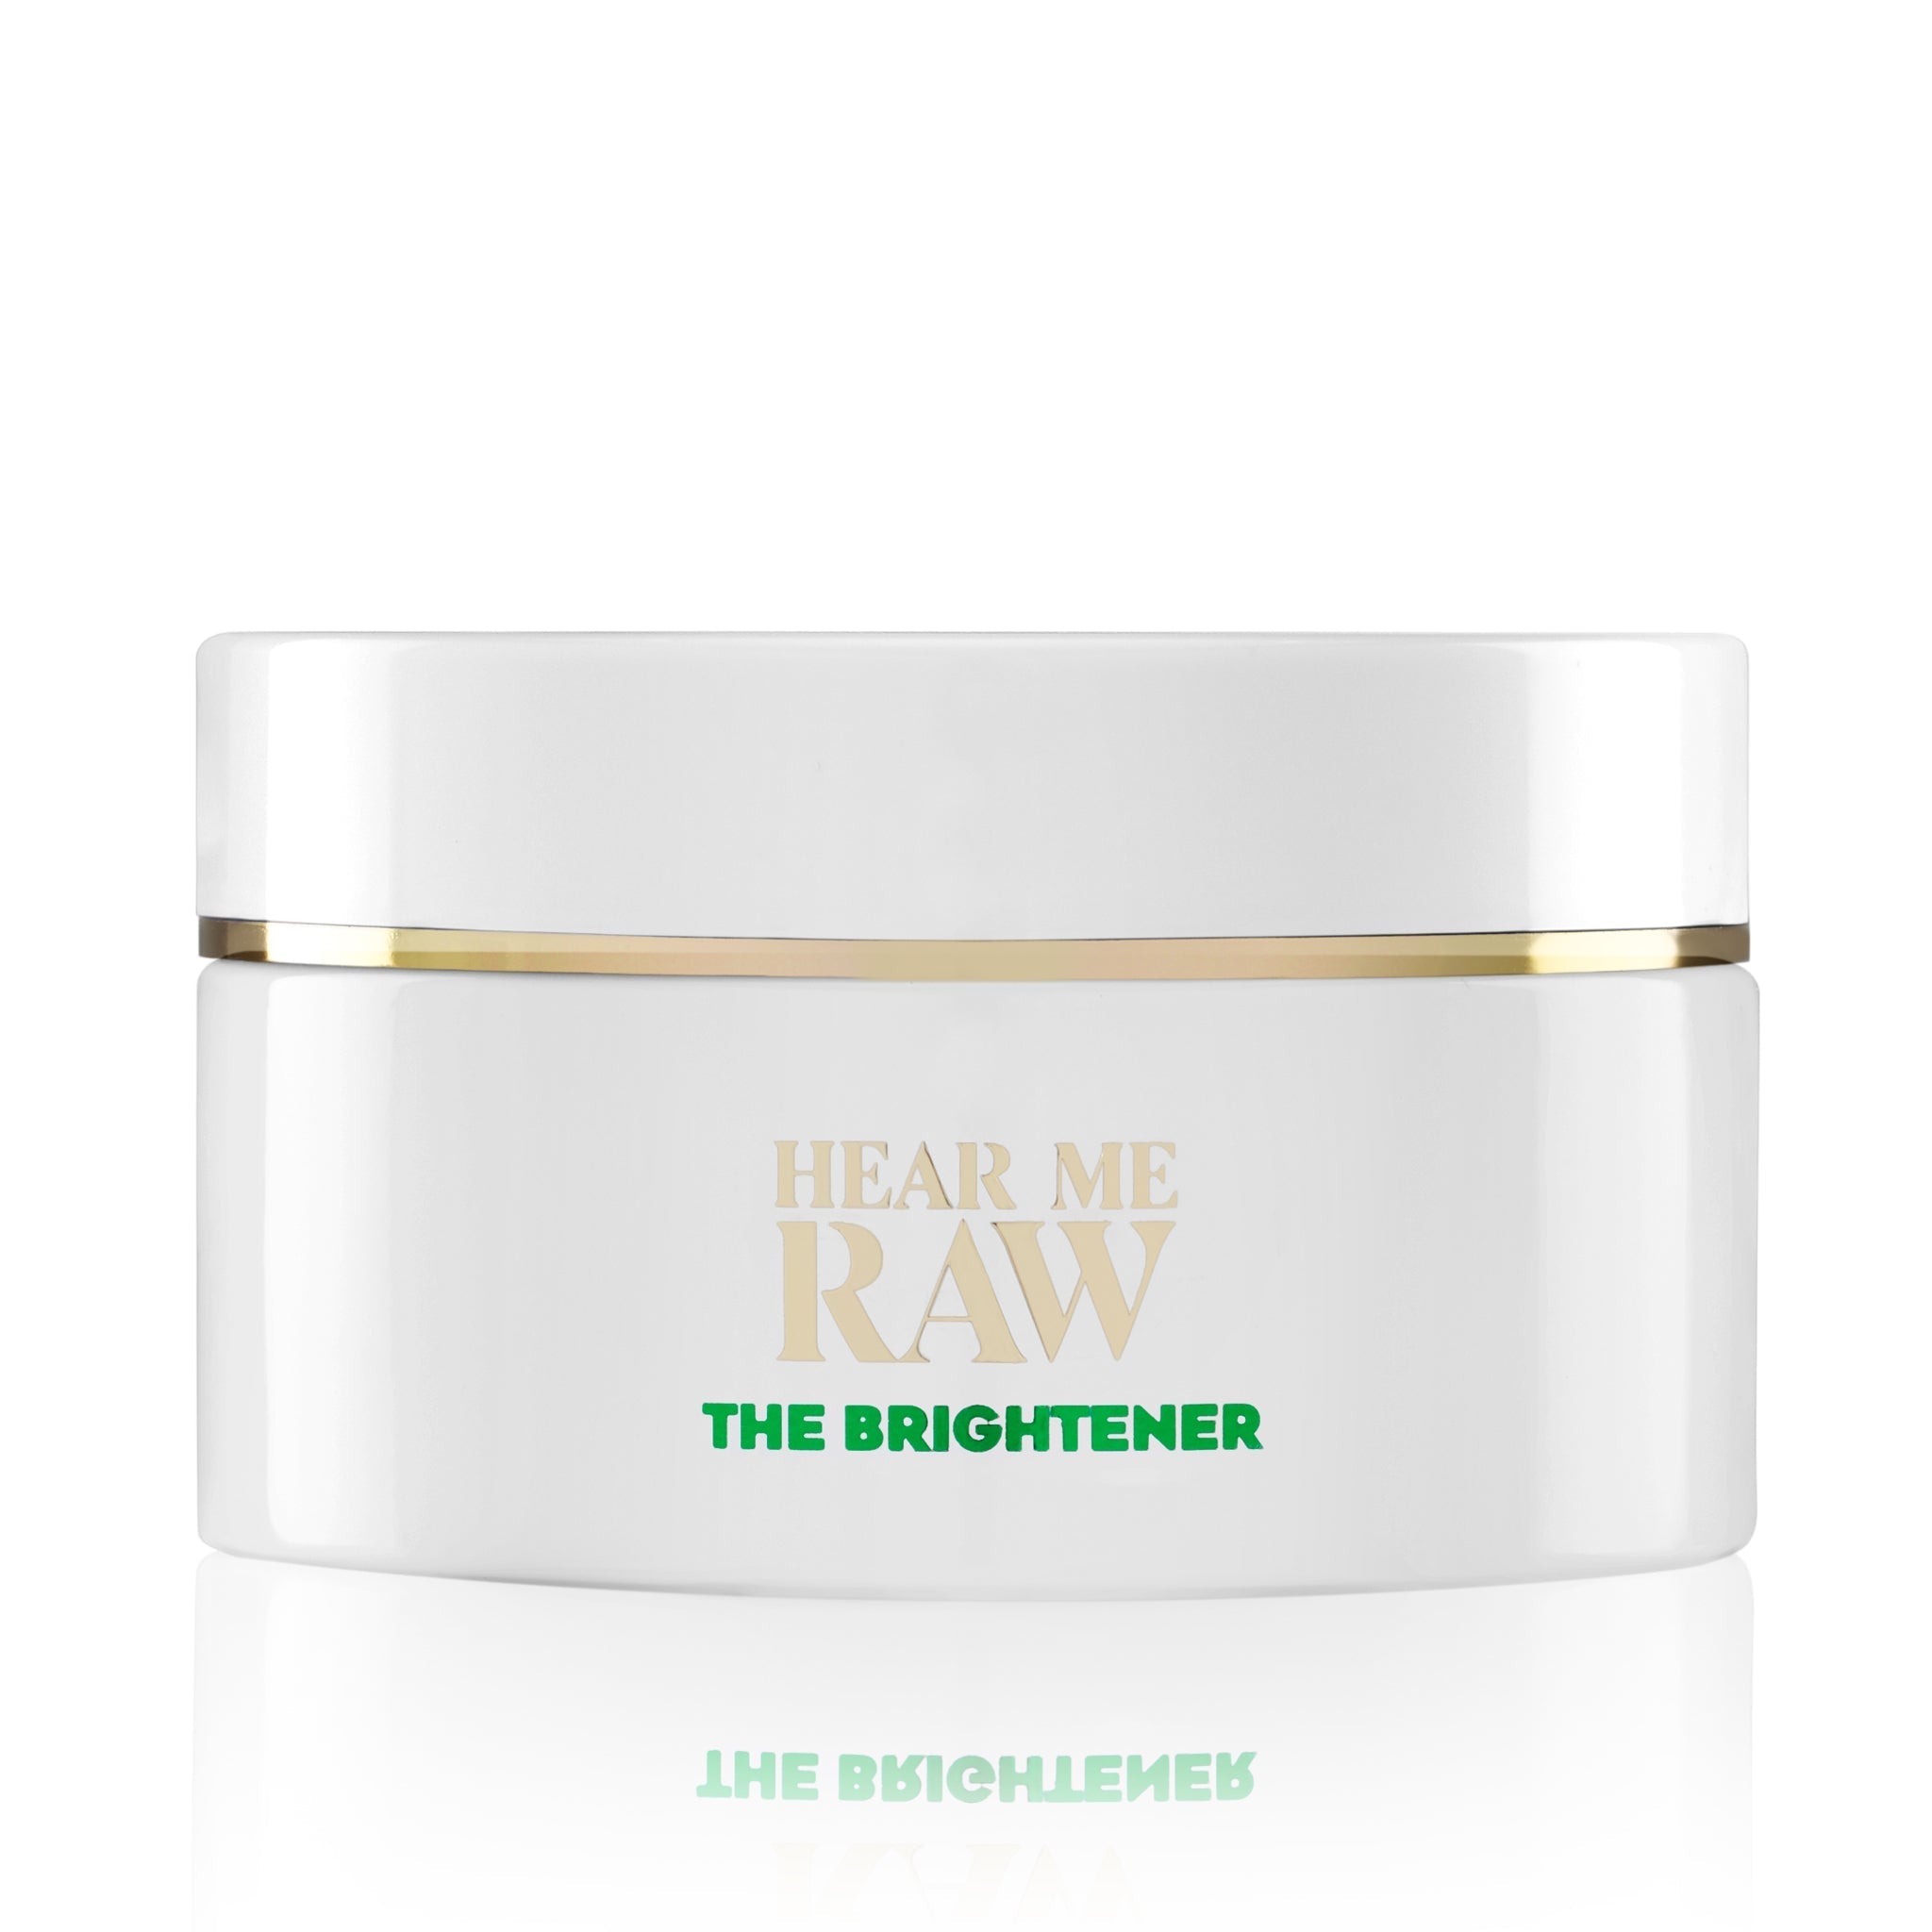 THE BRIGHTENER by HEAR ME RAW